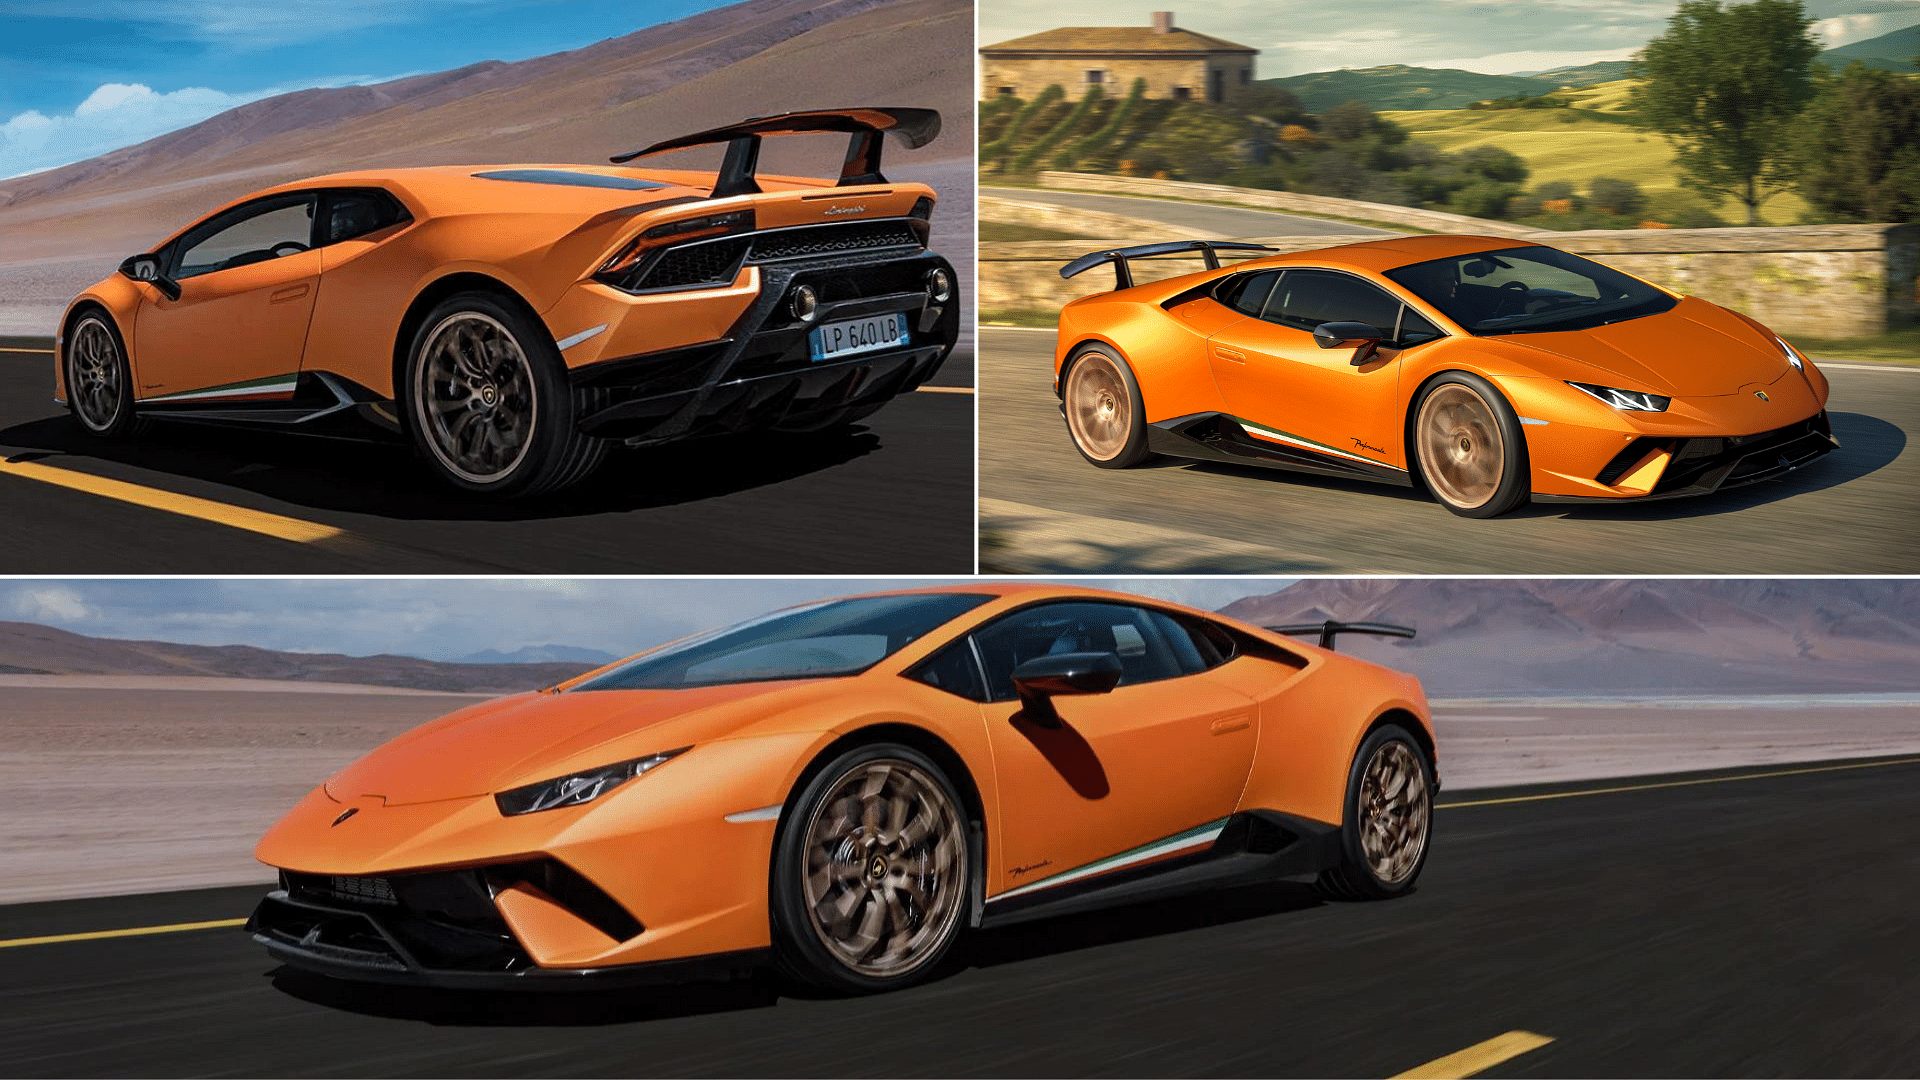 2019 Orange Huracan Performante coupe front, rear, and side view